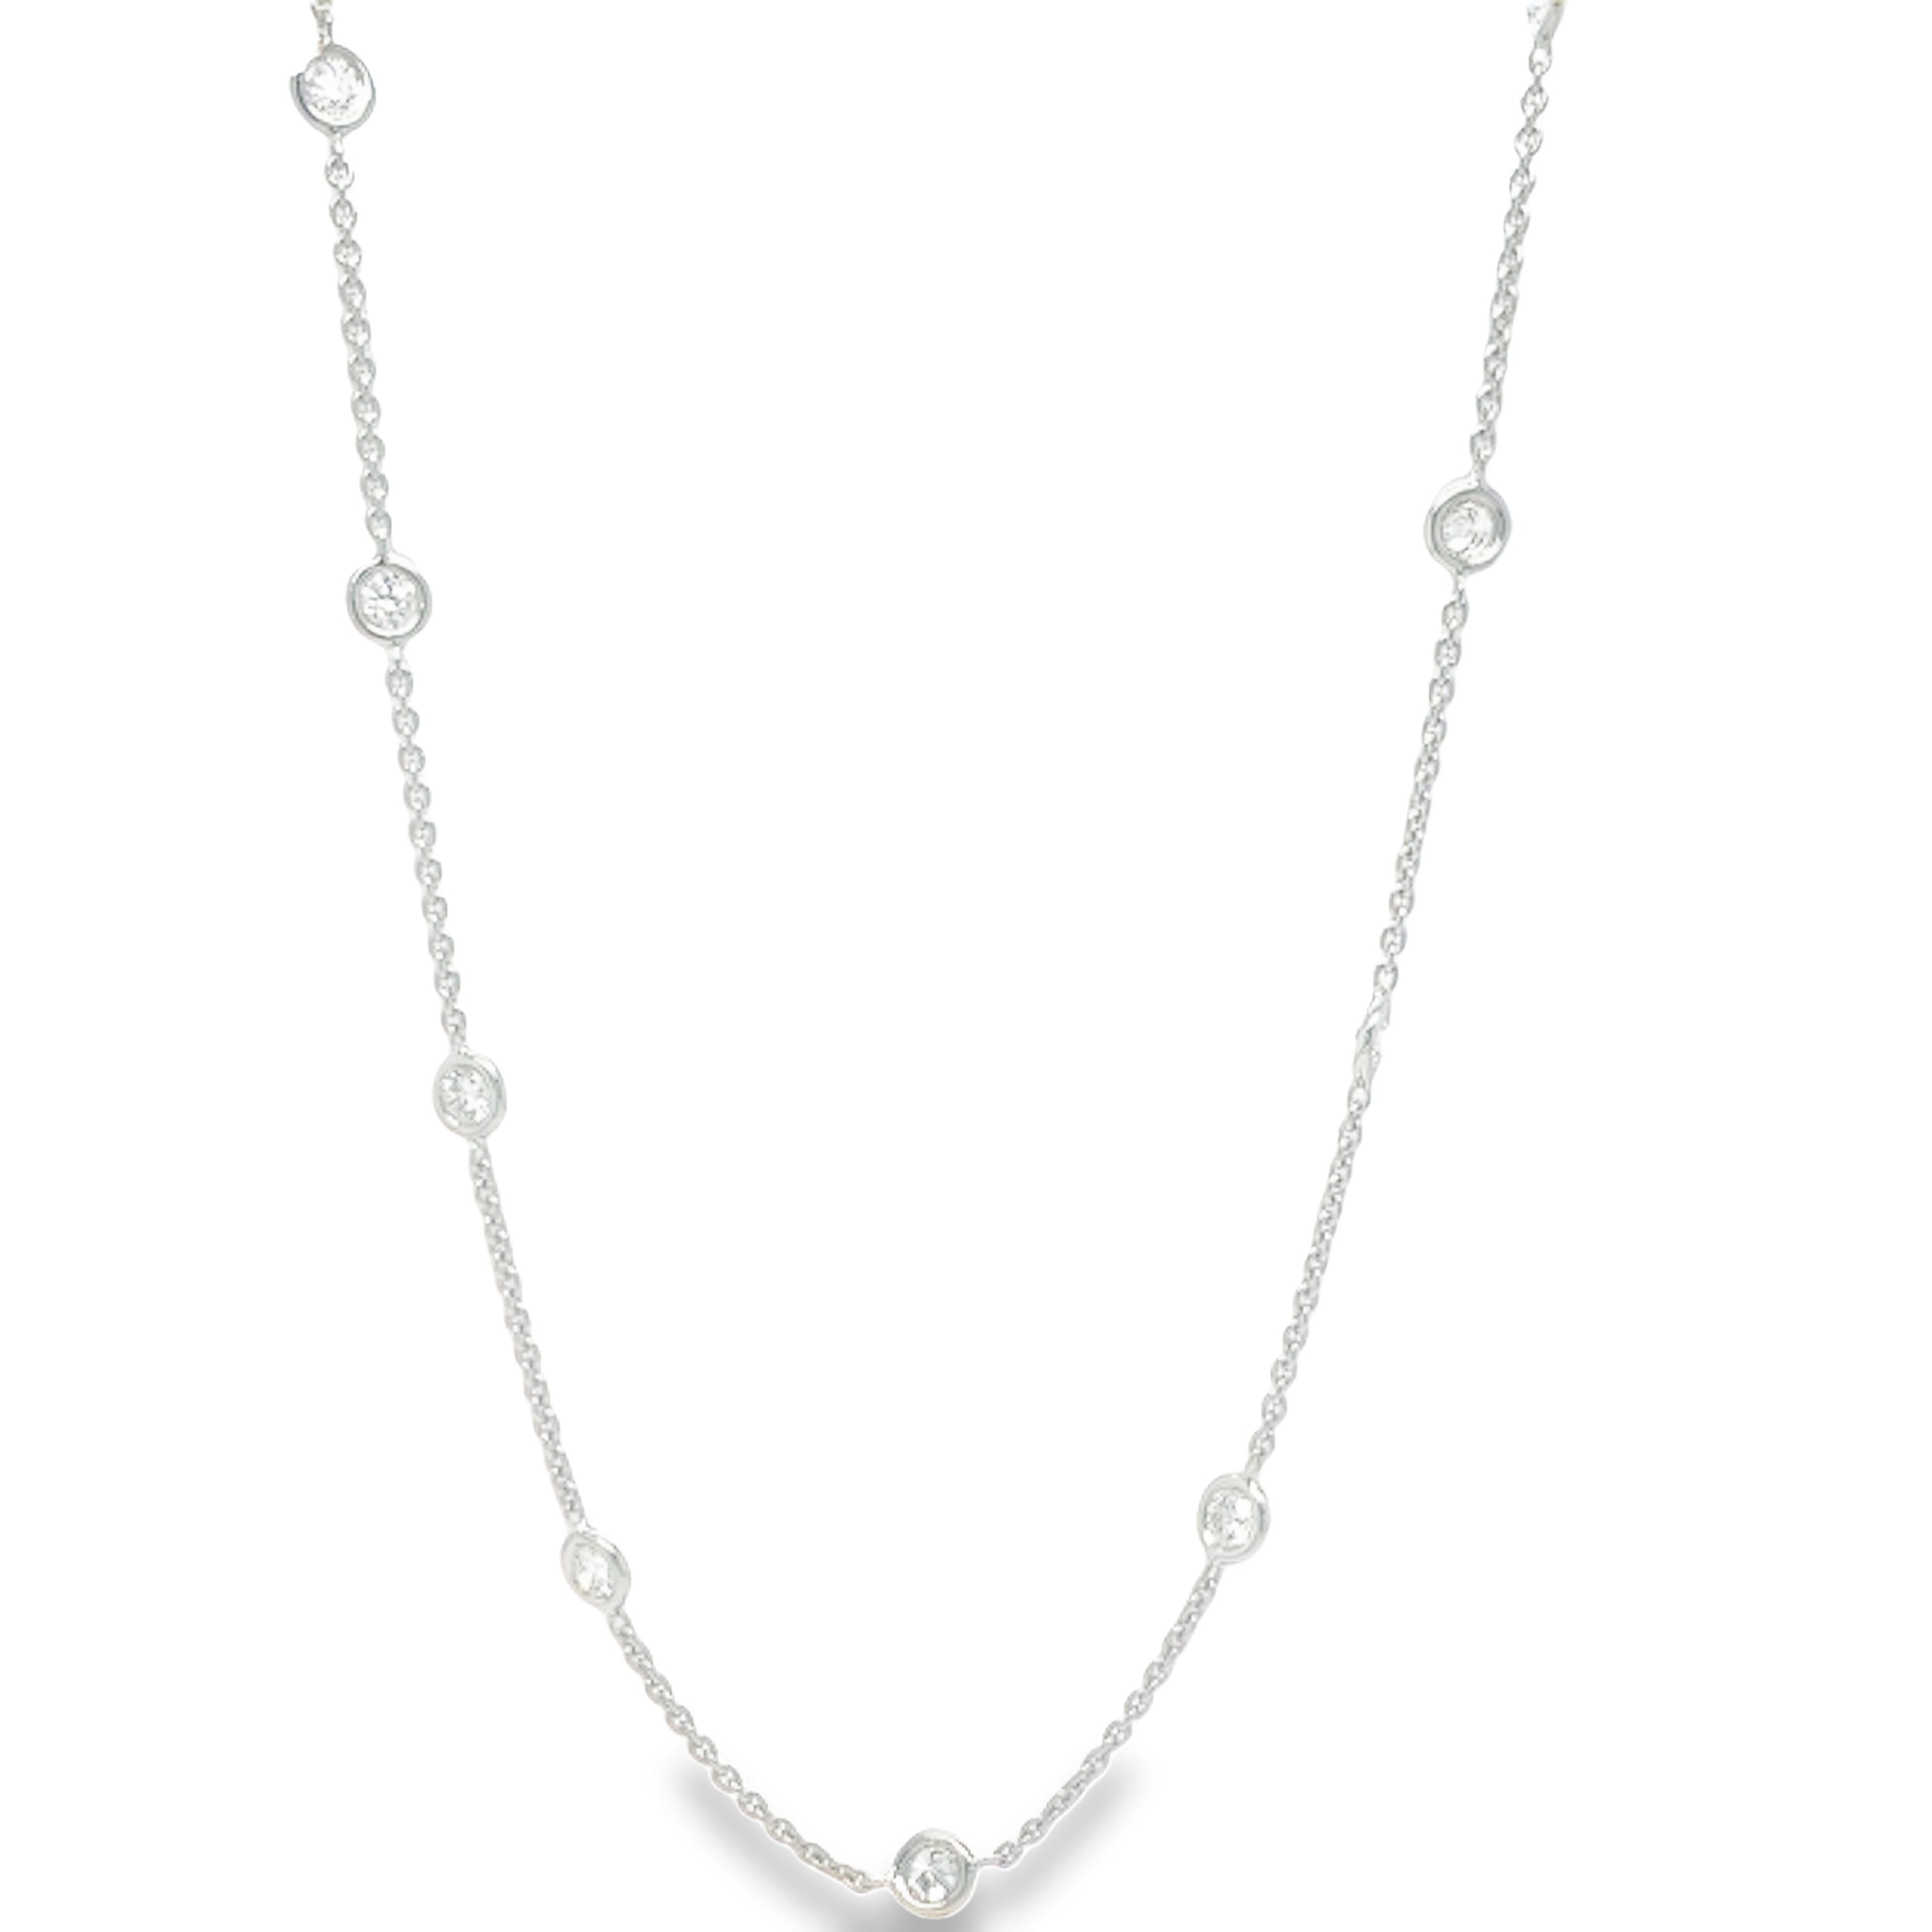 Elevate your jewelry collection with our Diamond by the Yard Necklace. Featuring 18 sparkling round diamonds totaling 1.50 cts, each bezel set for maximum brilliance. The secure lobster catch ensures this 18" necklace stays in place. A luxurious 18k white gold chain enhances the overall elegance